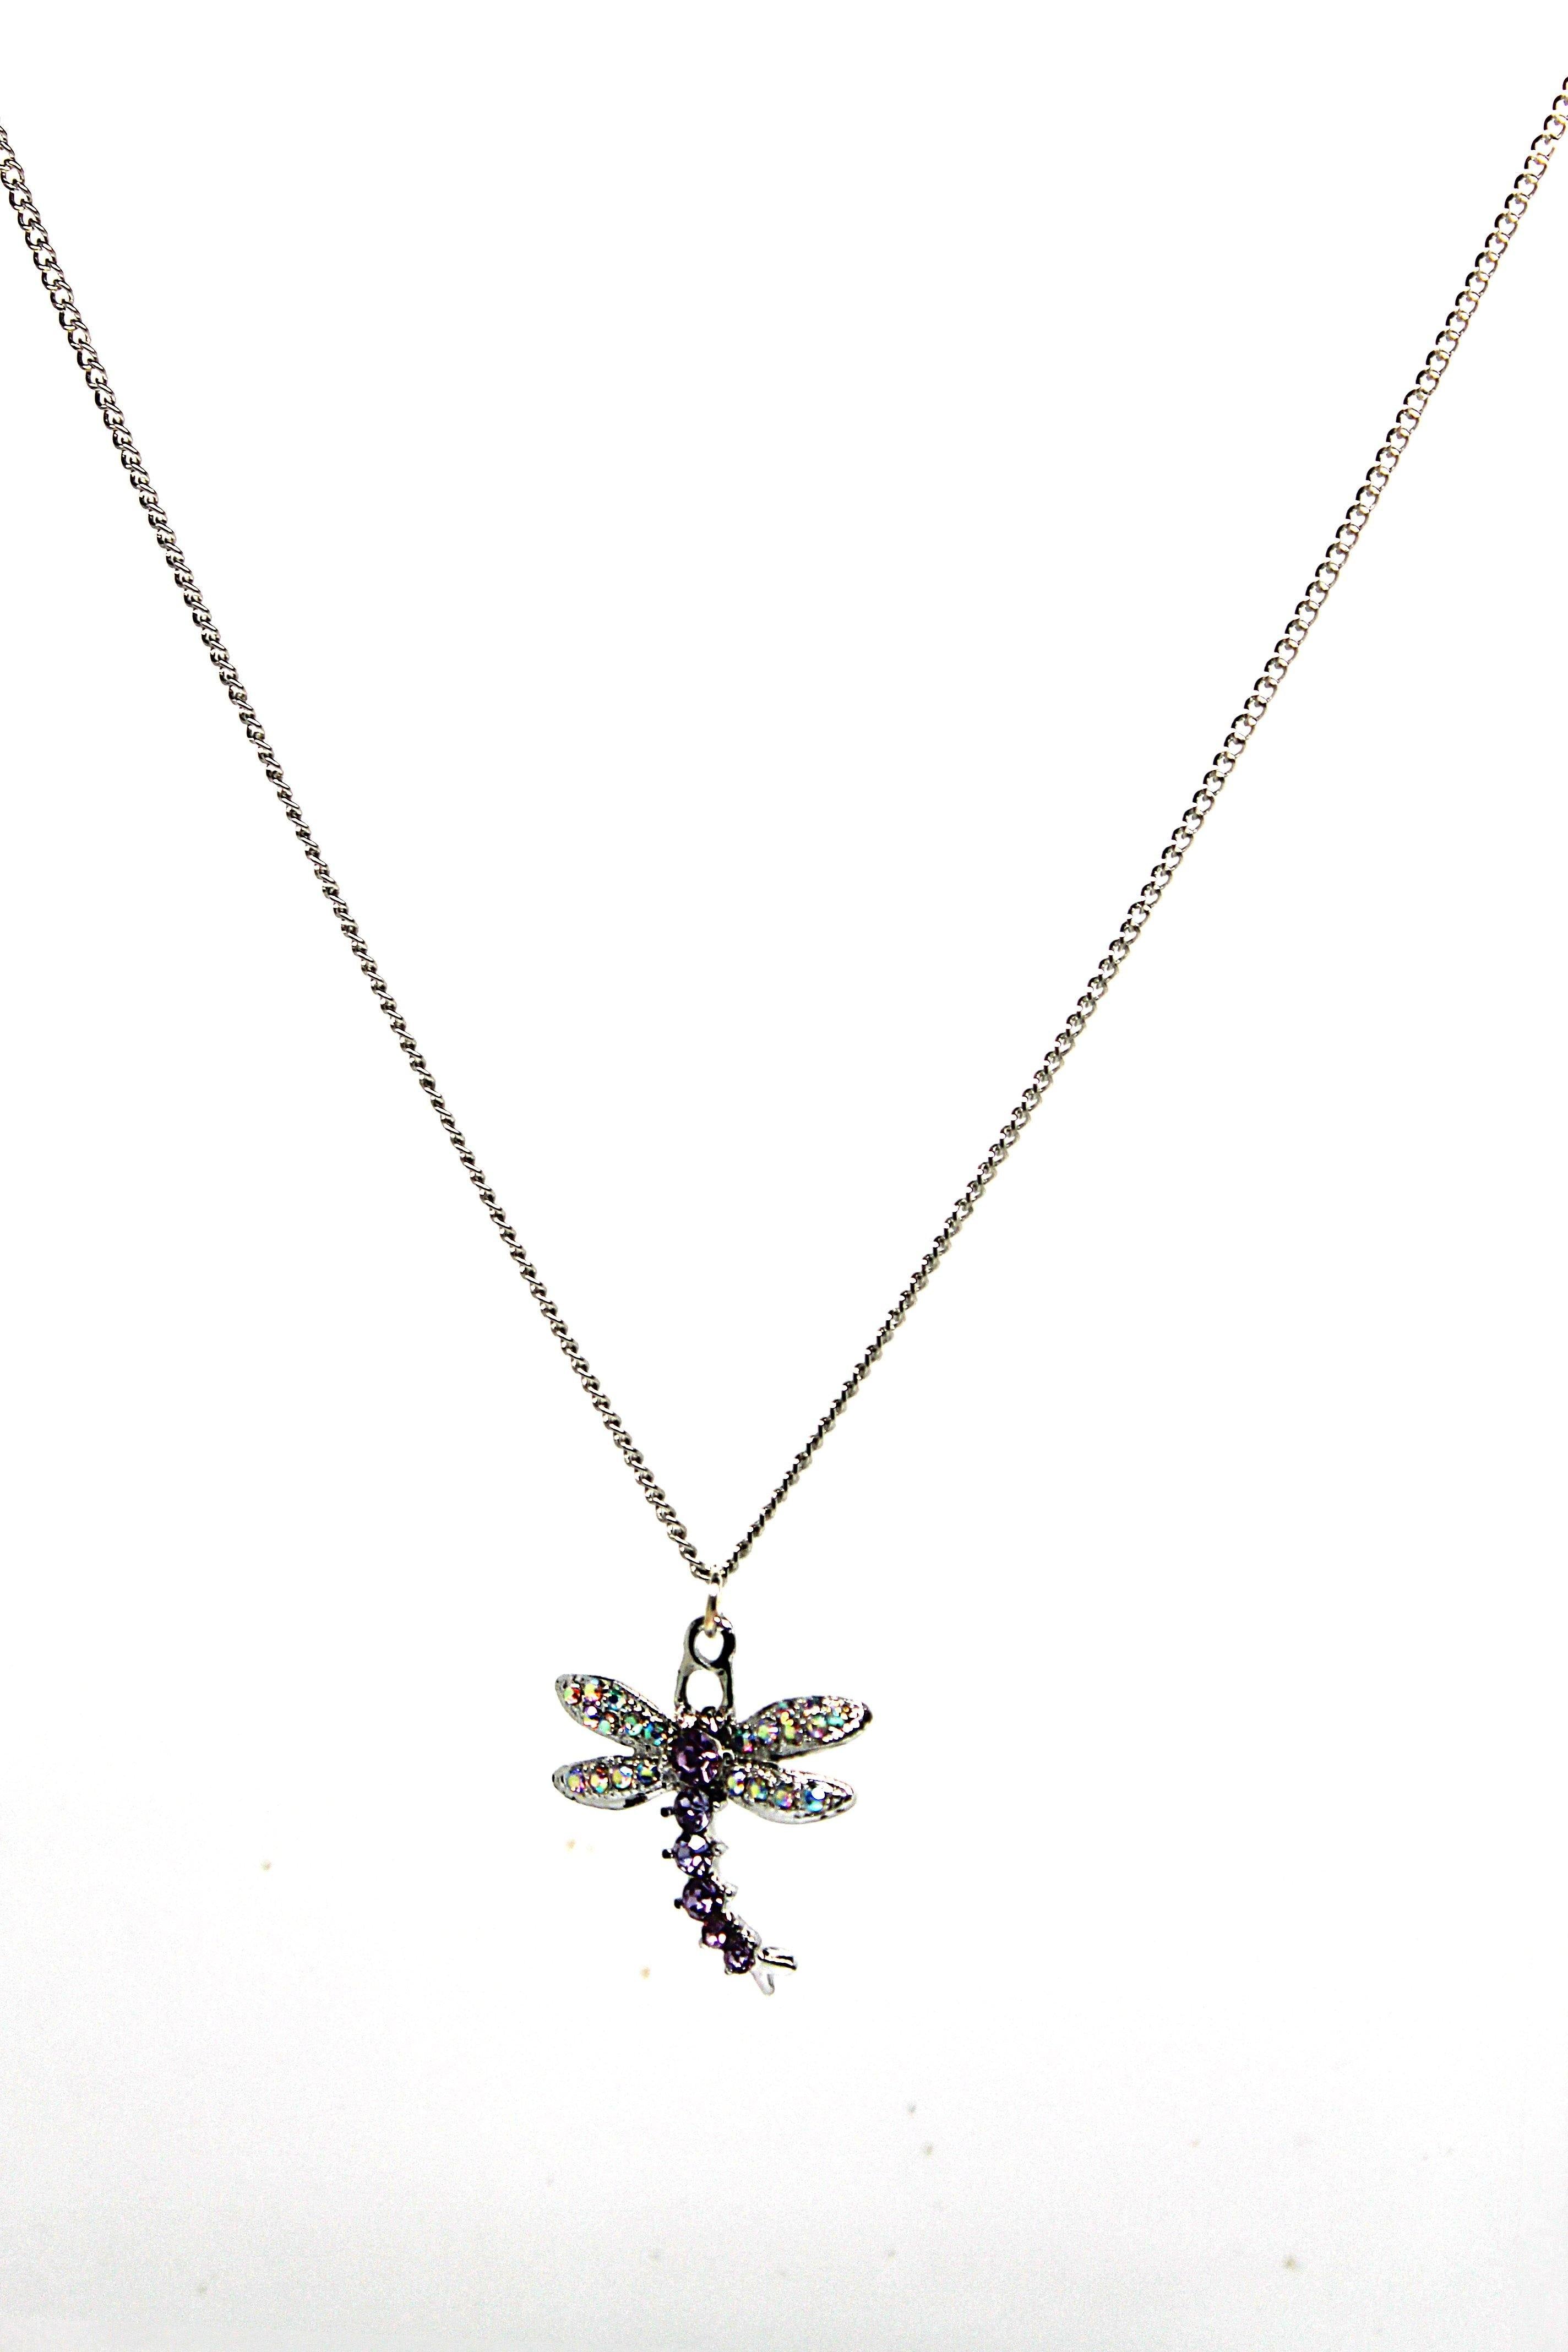 Dragonfly Necklace - Wildtouch - Wildtouch